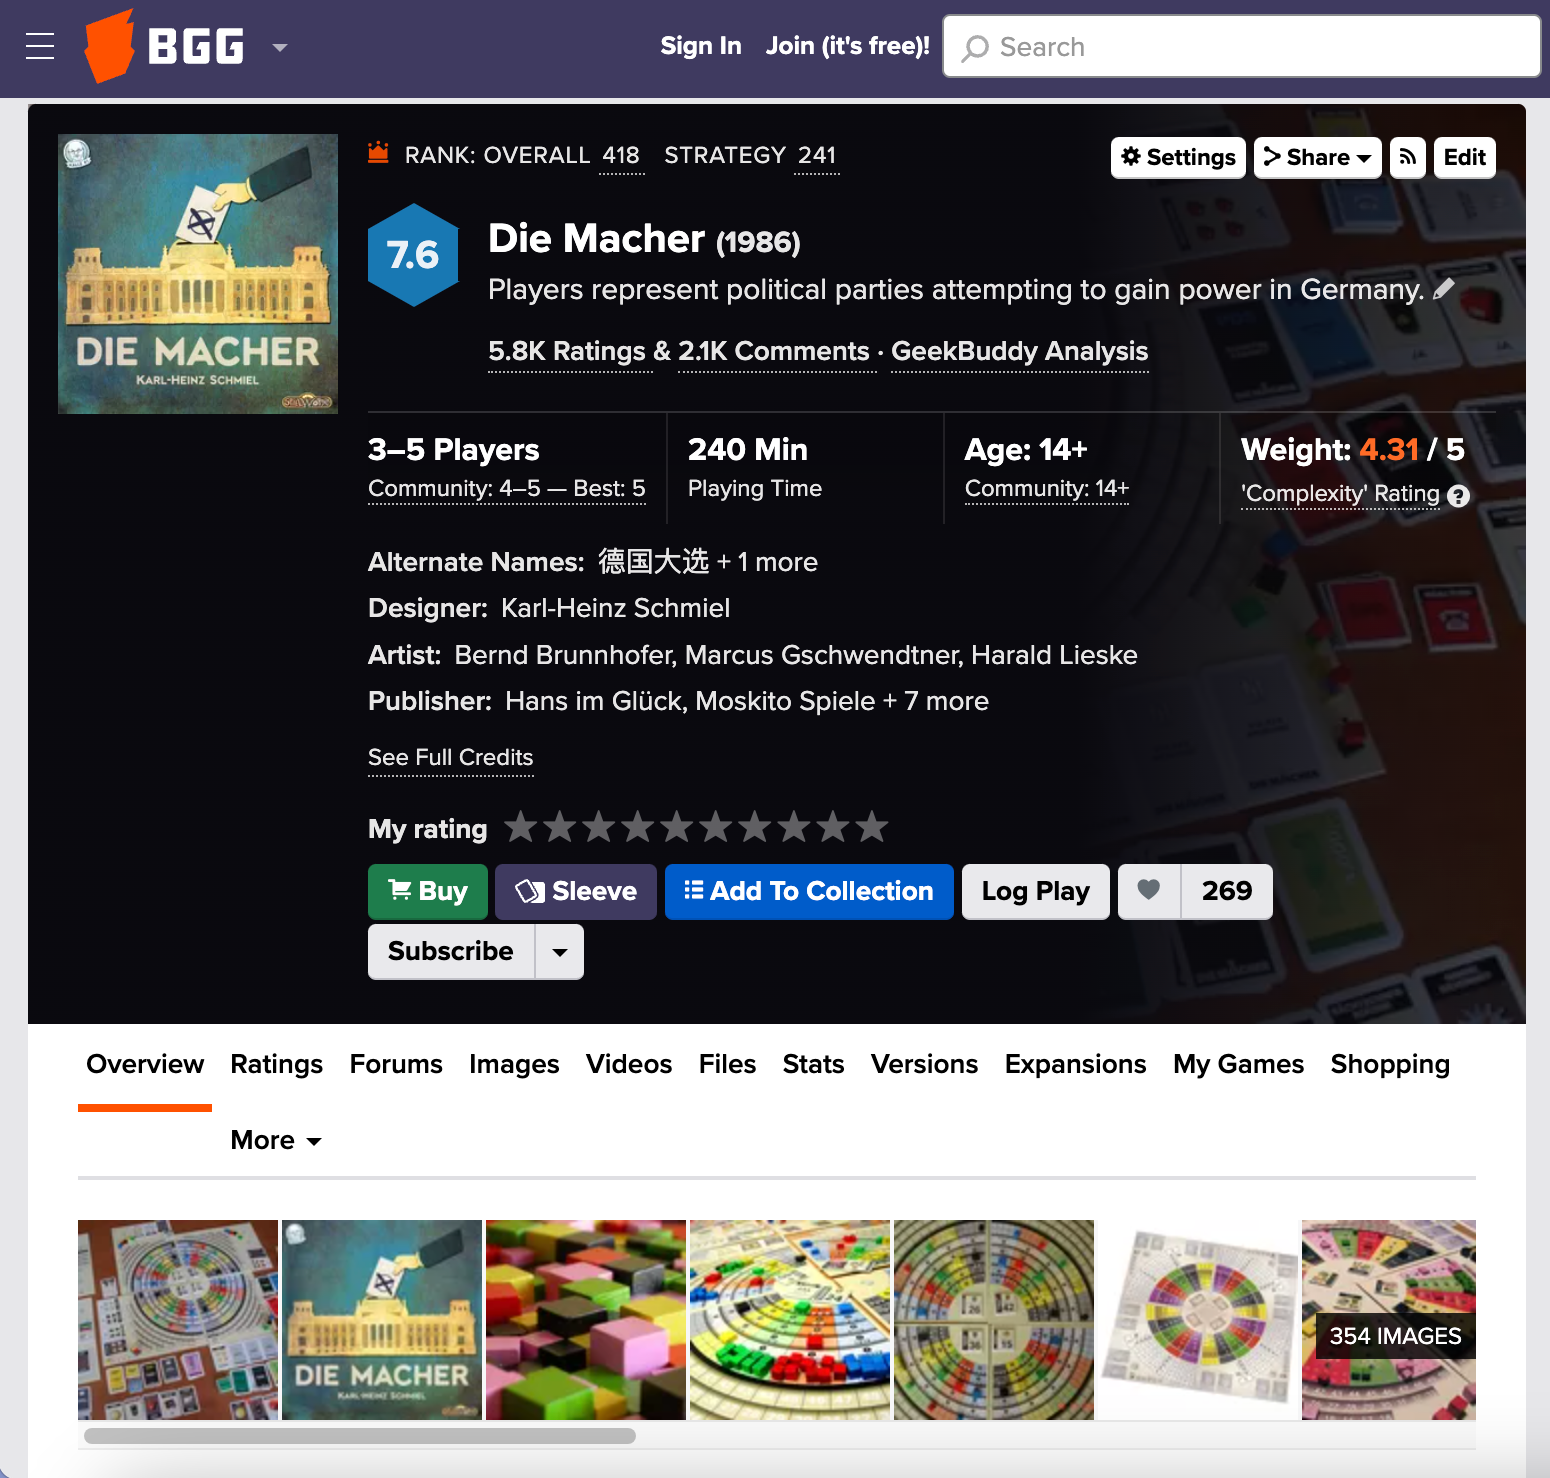 A screenshot of the game page for Die Macher on www.boardgamegeek.com, showing the game's cover, production information, and categories for more information, such as "Ratings", "Images", and "Videos".